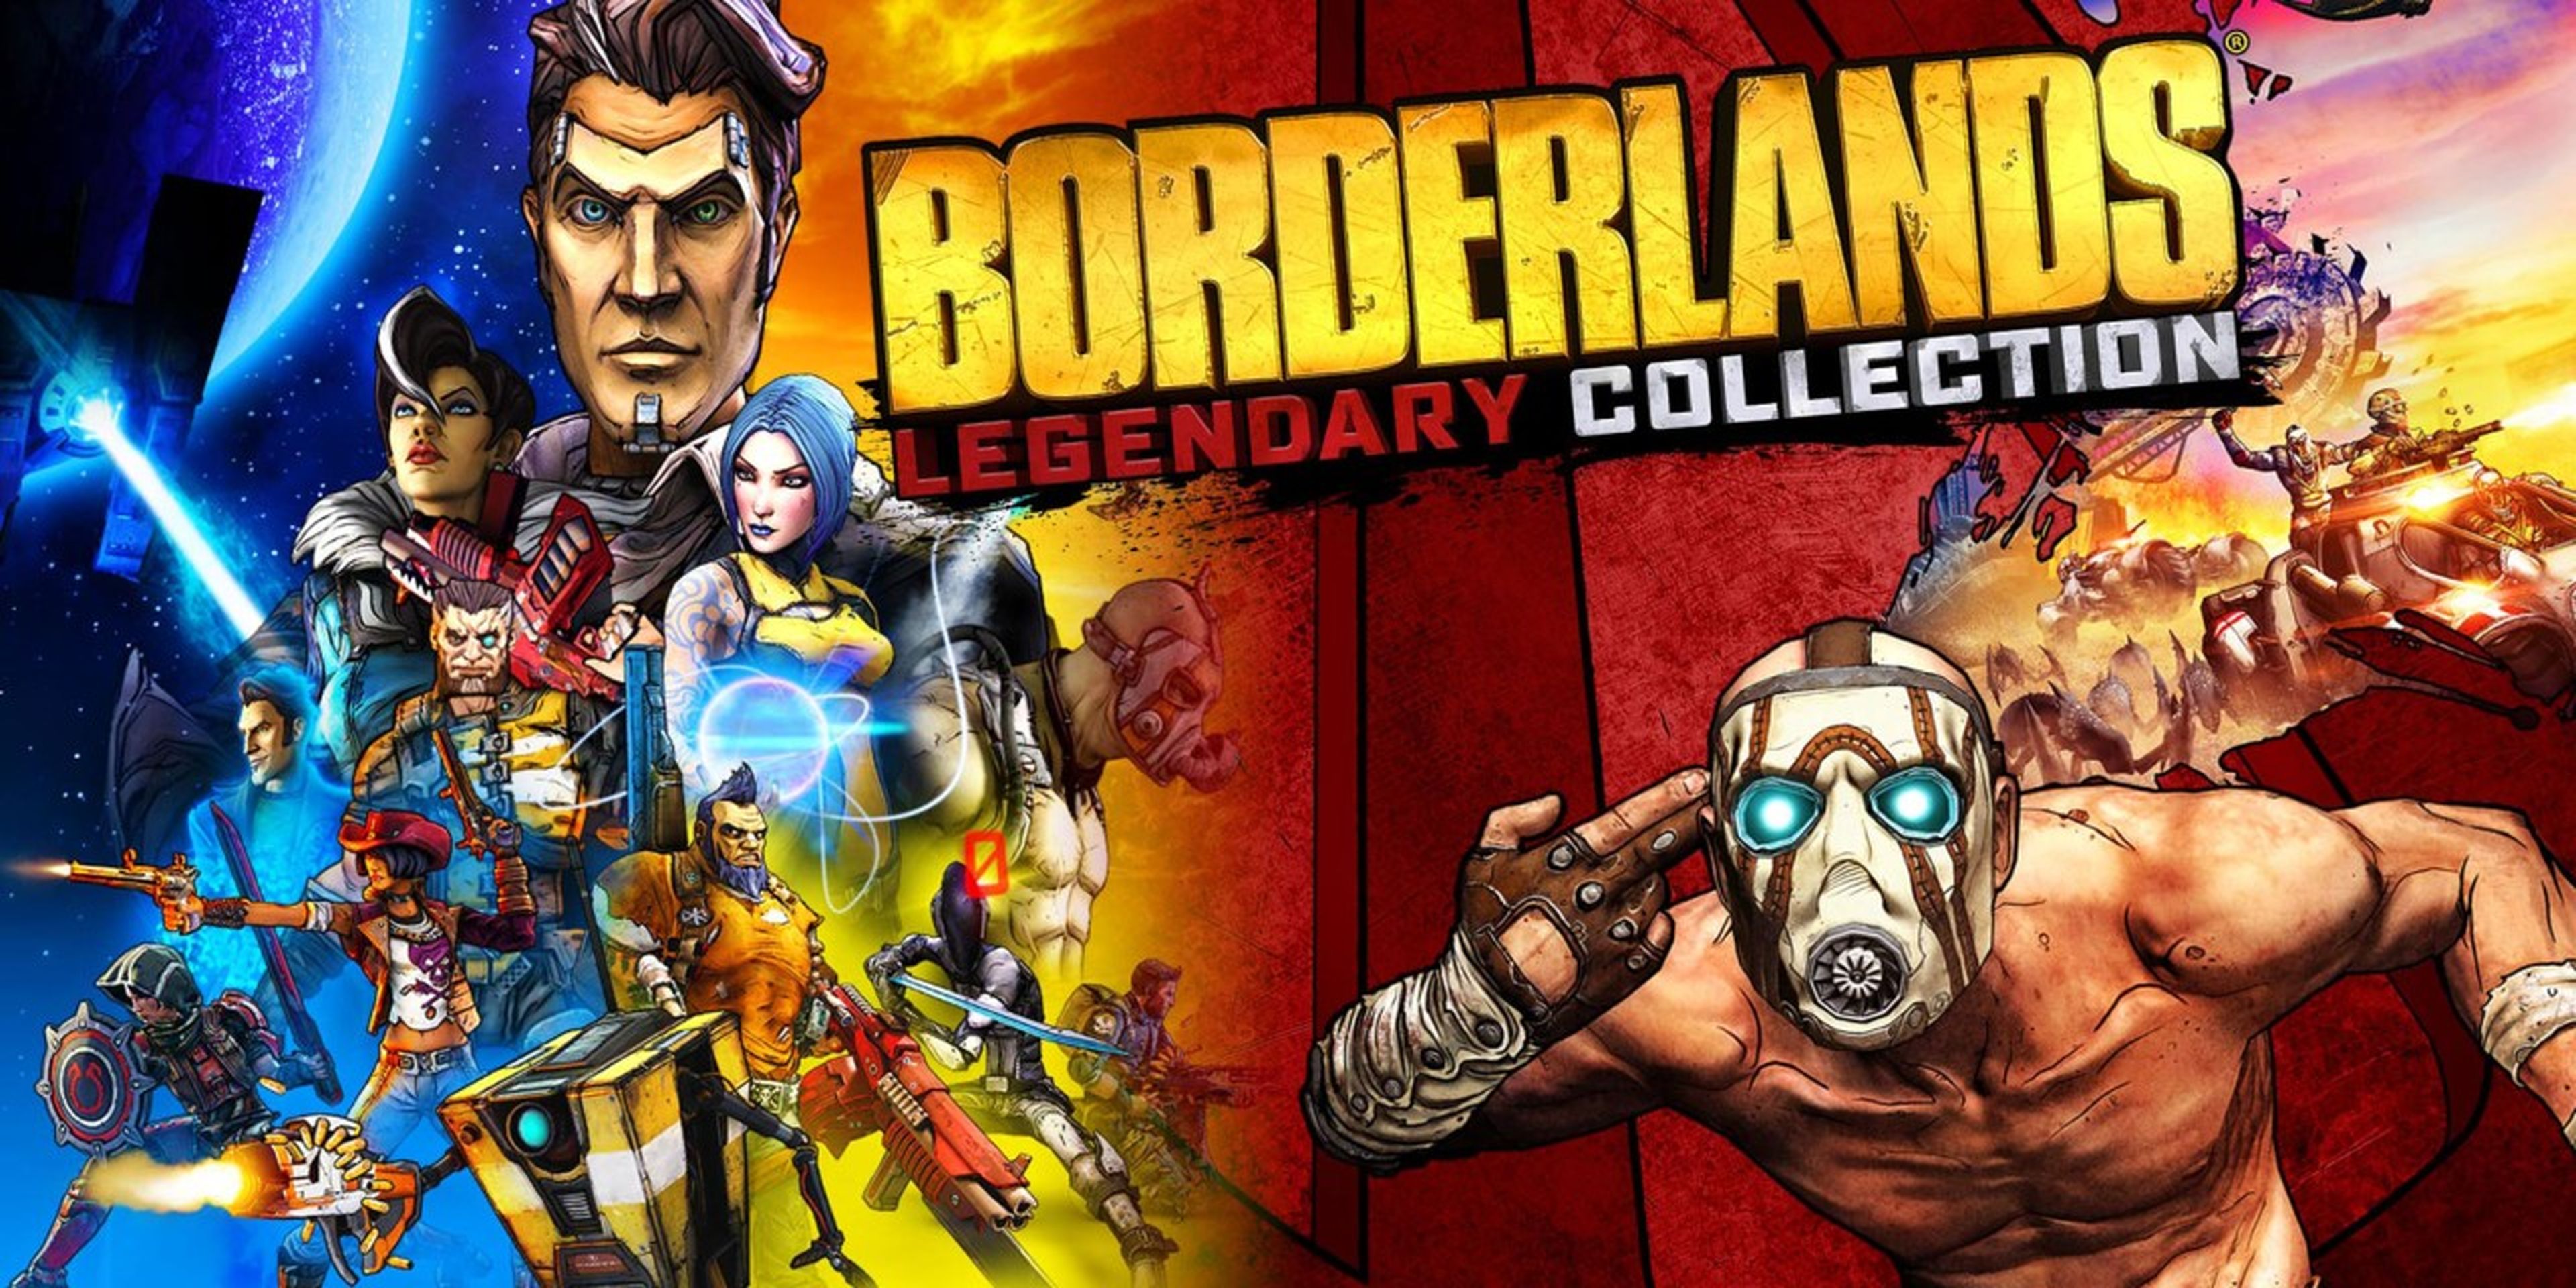 The Borderlands Legendary Collection